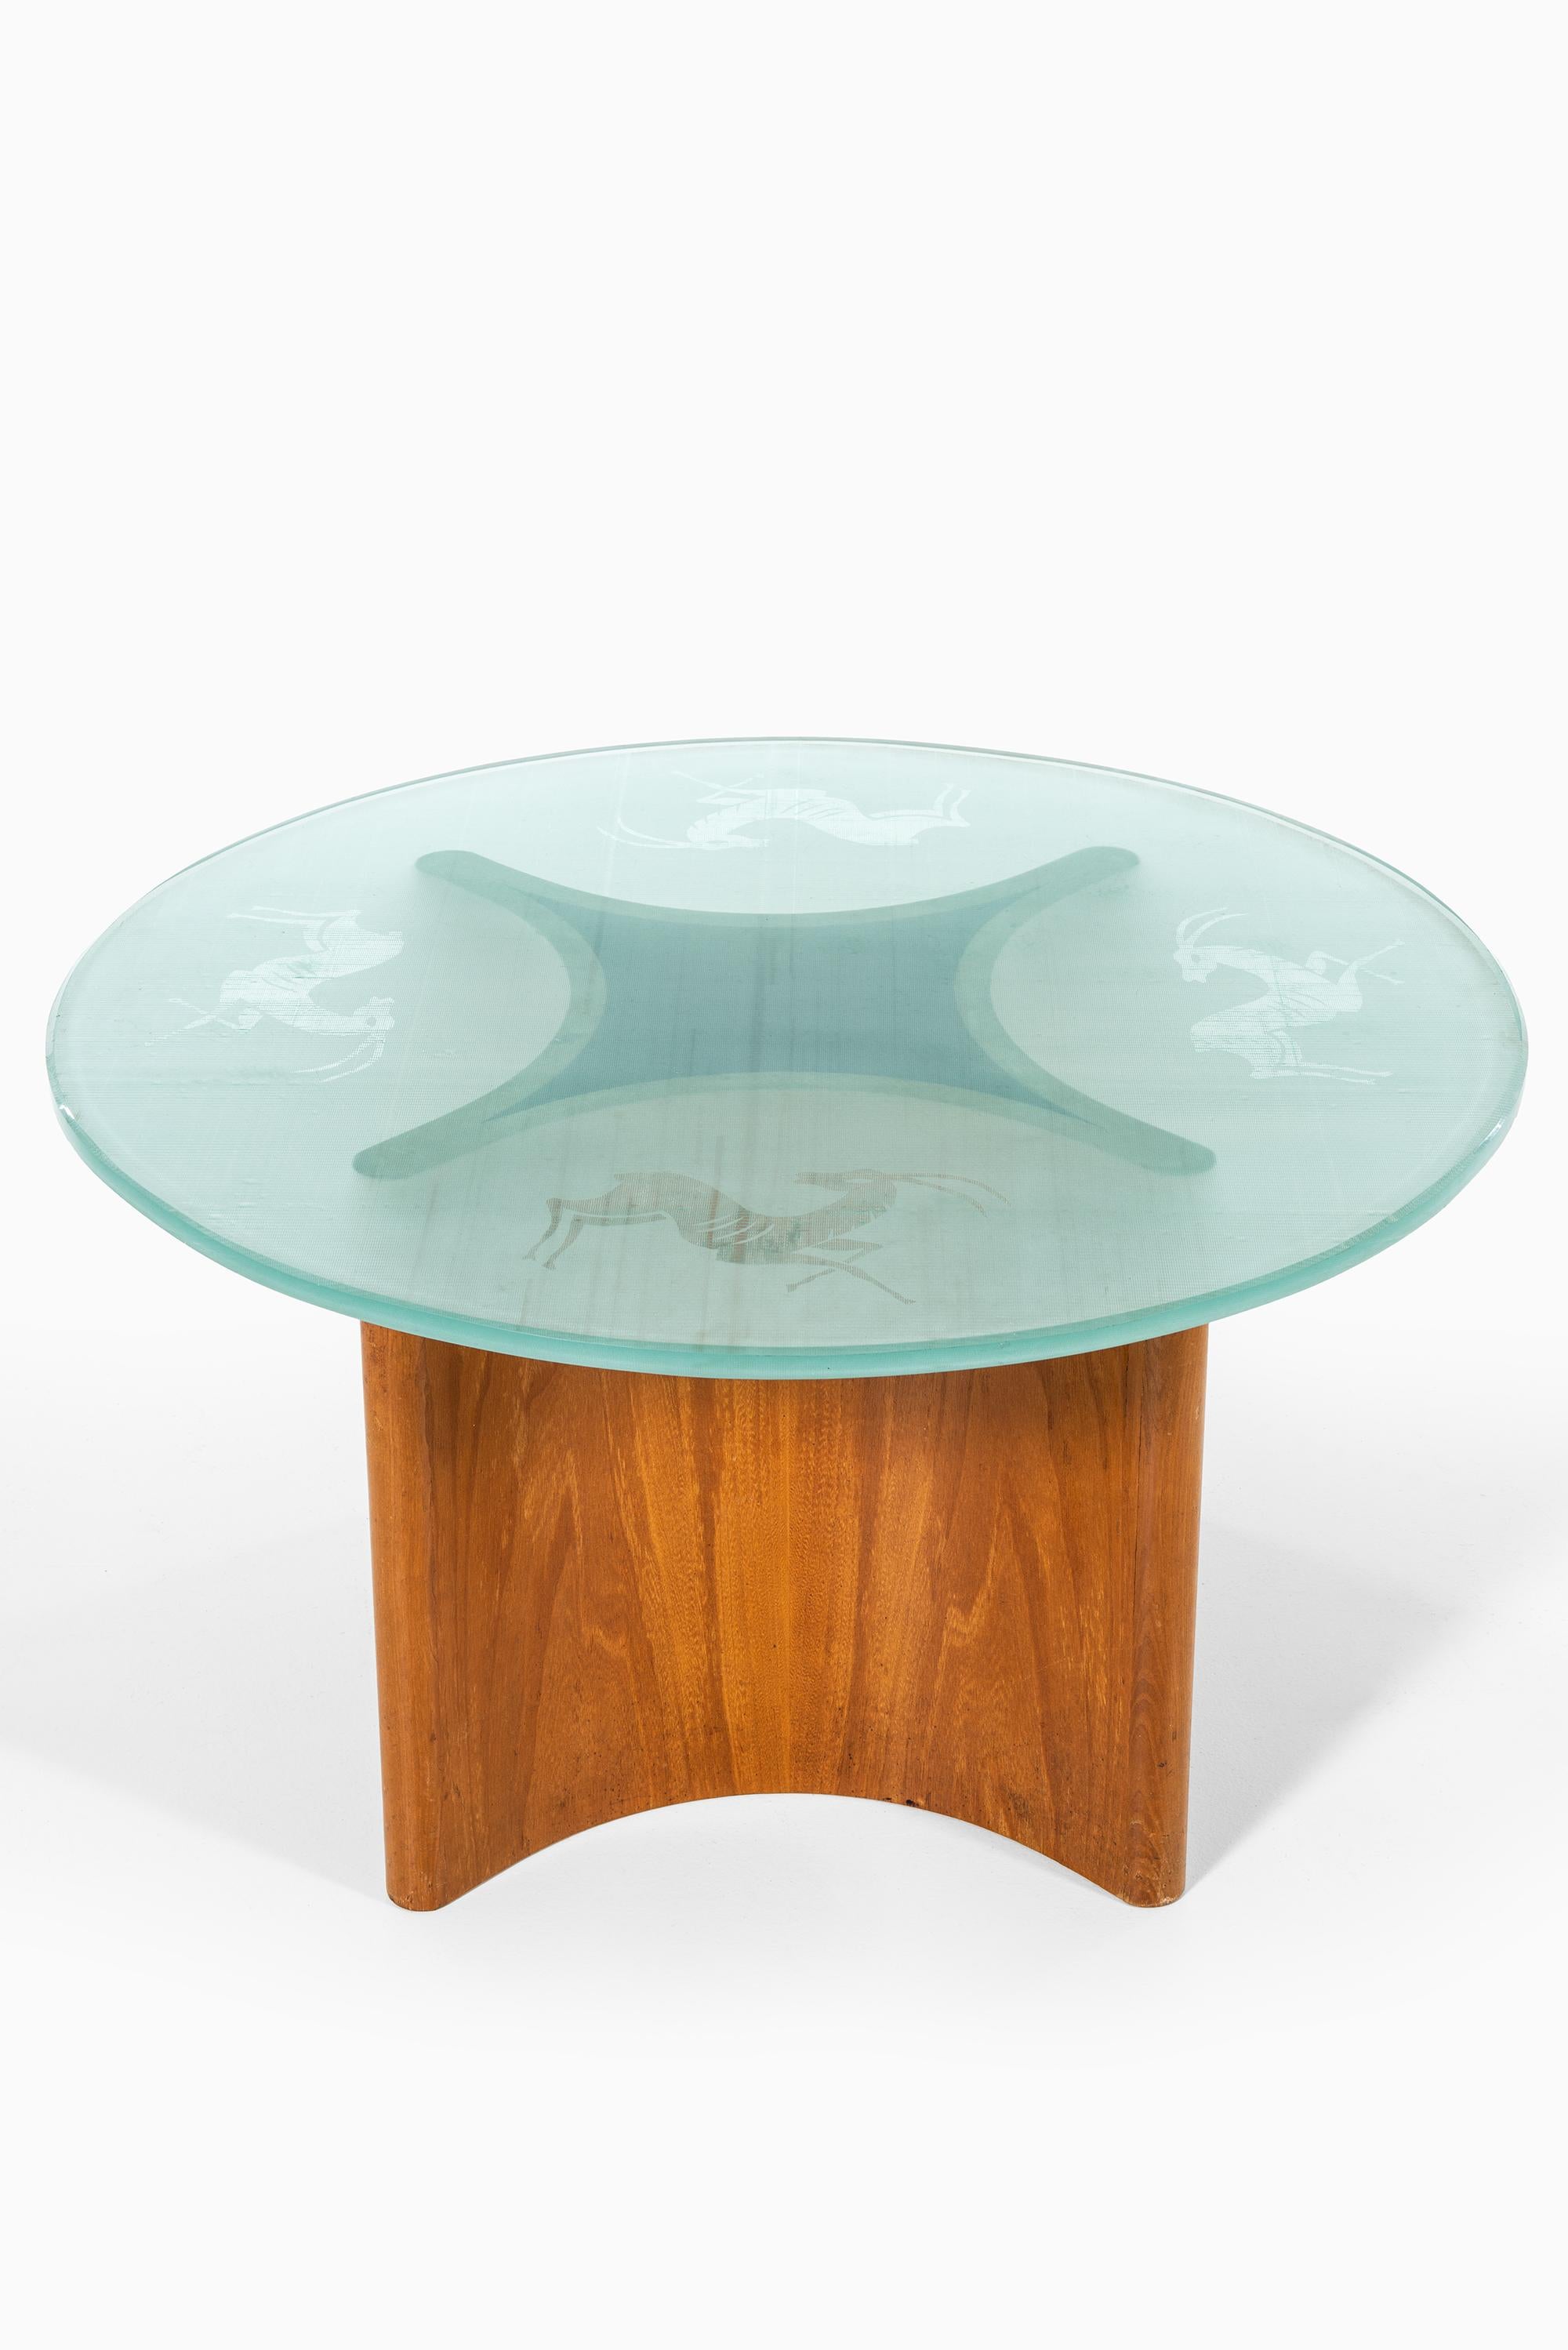 Mid-20th Century Coffee Table from 1943 Produced by Reiners Möbelfabrik in Mjölby, Sweden